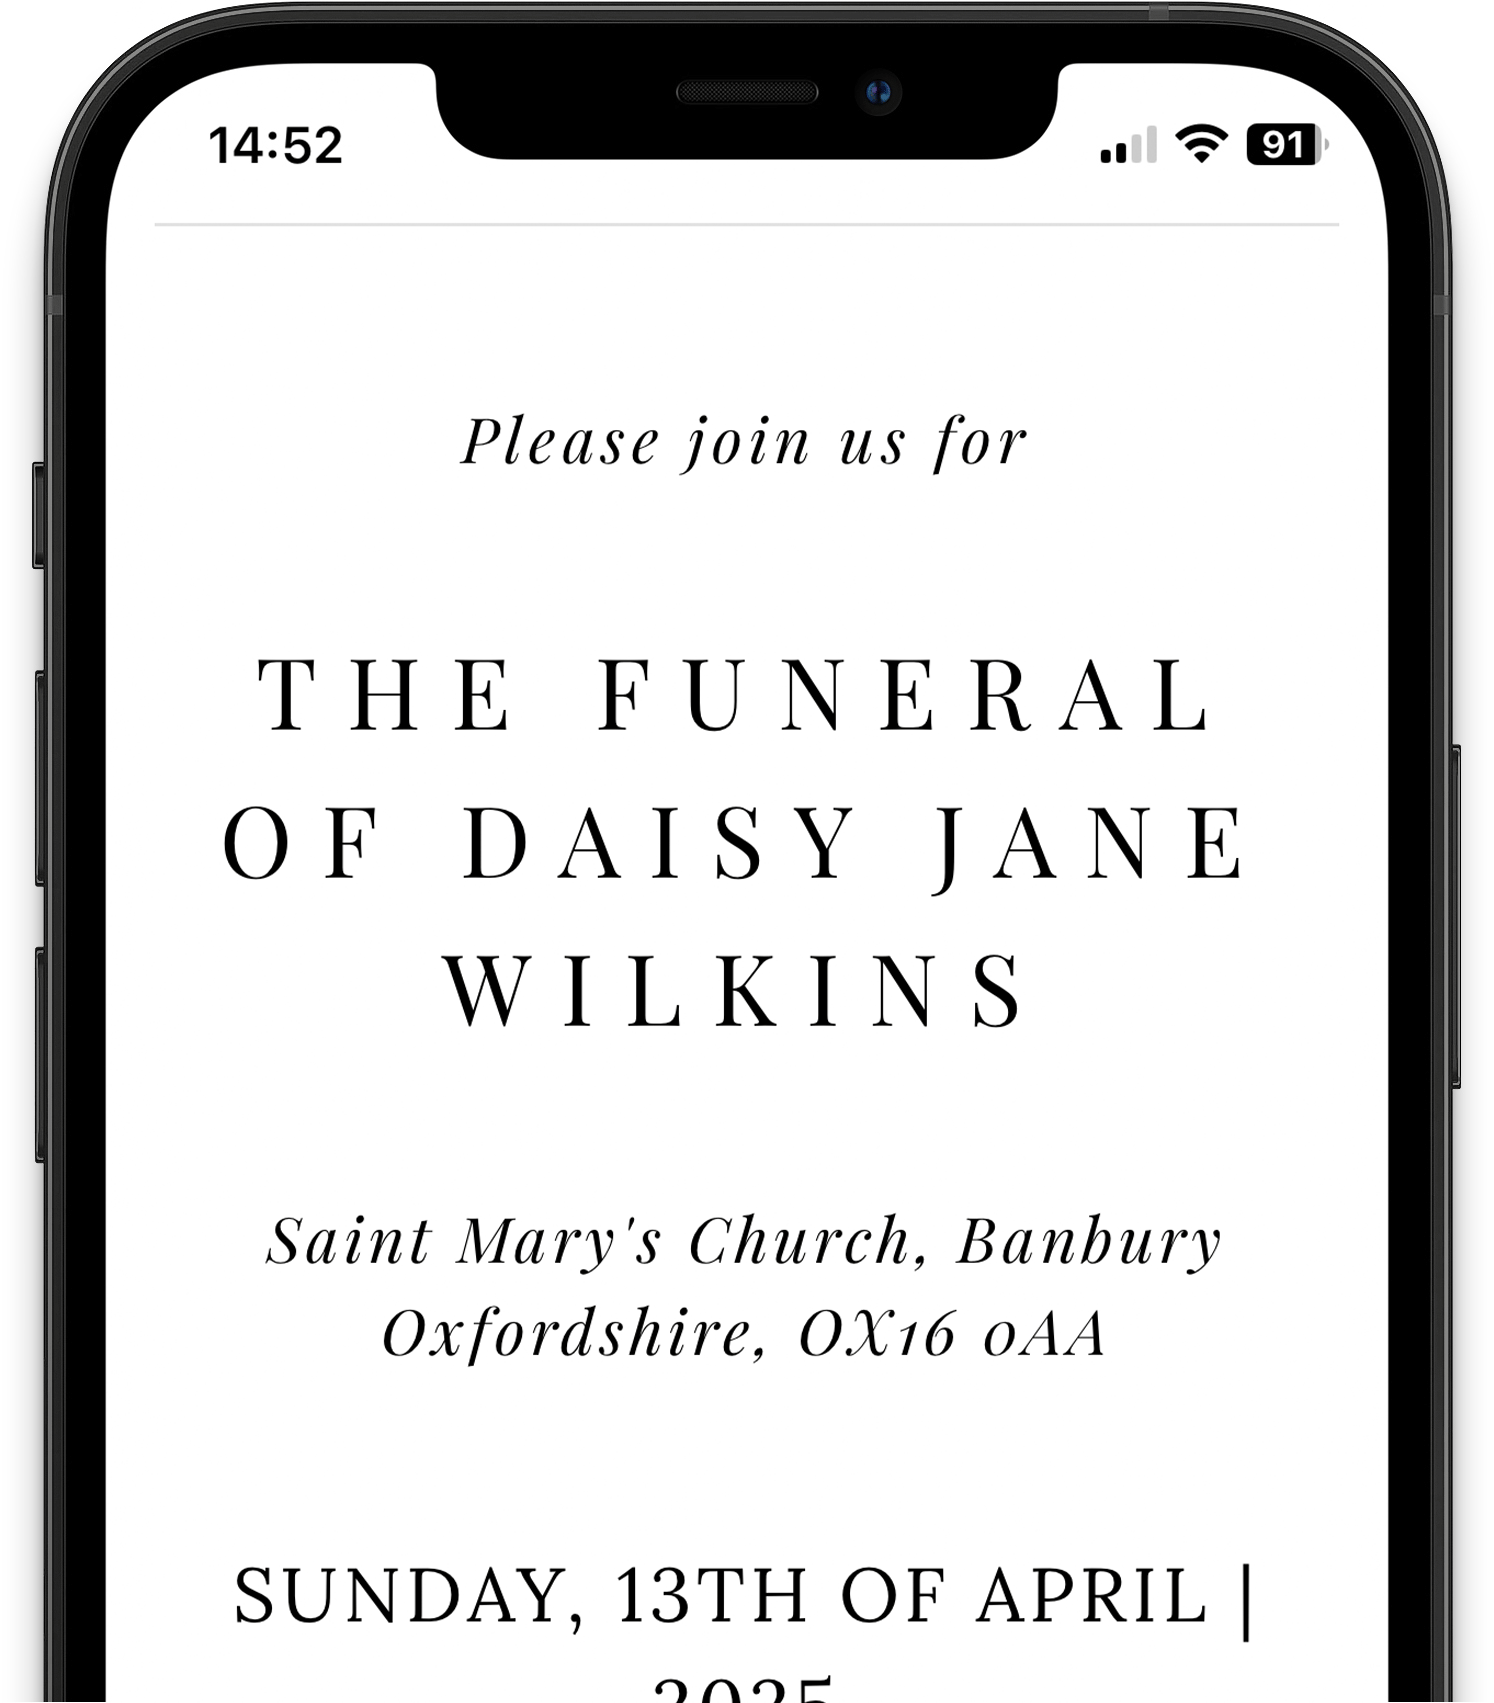 A digital funeral RSVP with lots of different information about an upcoming funeral service